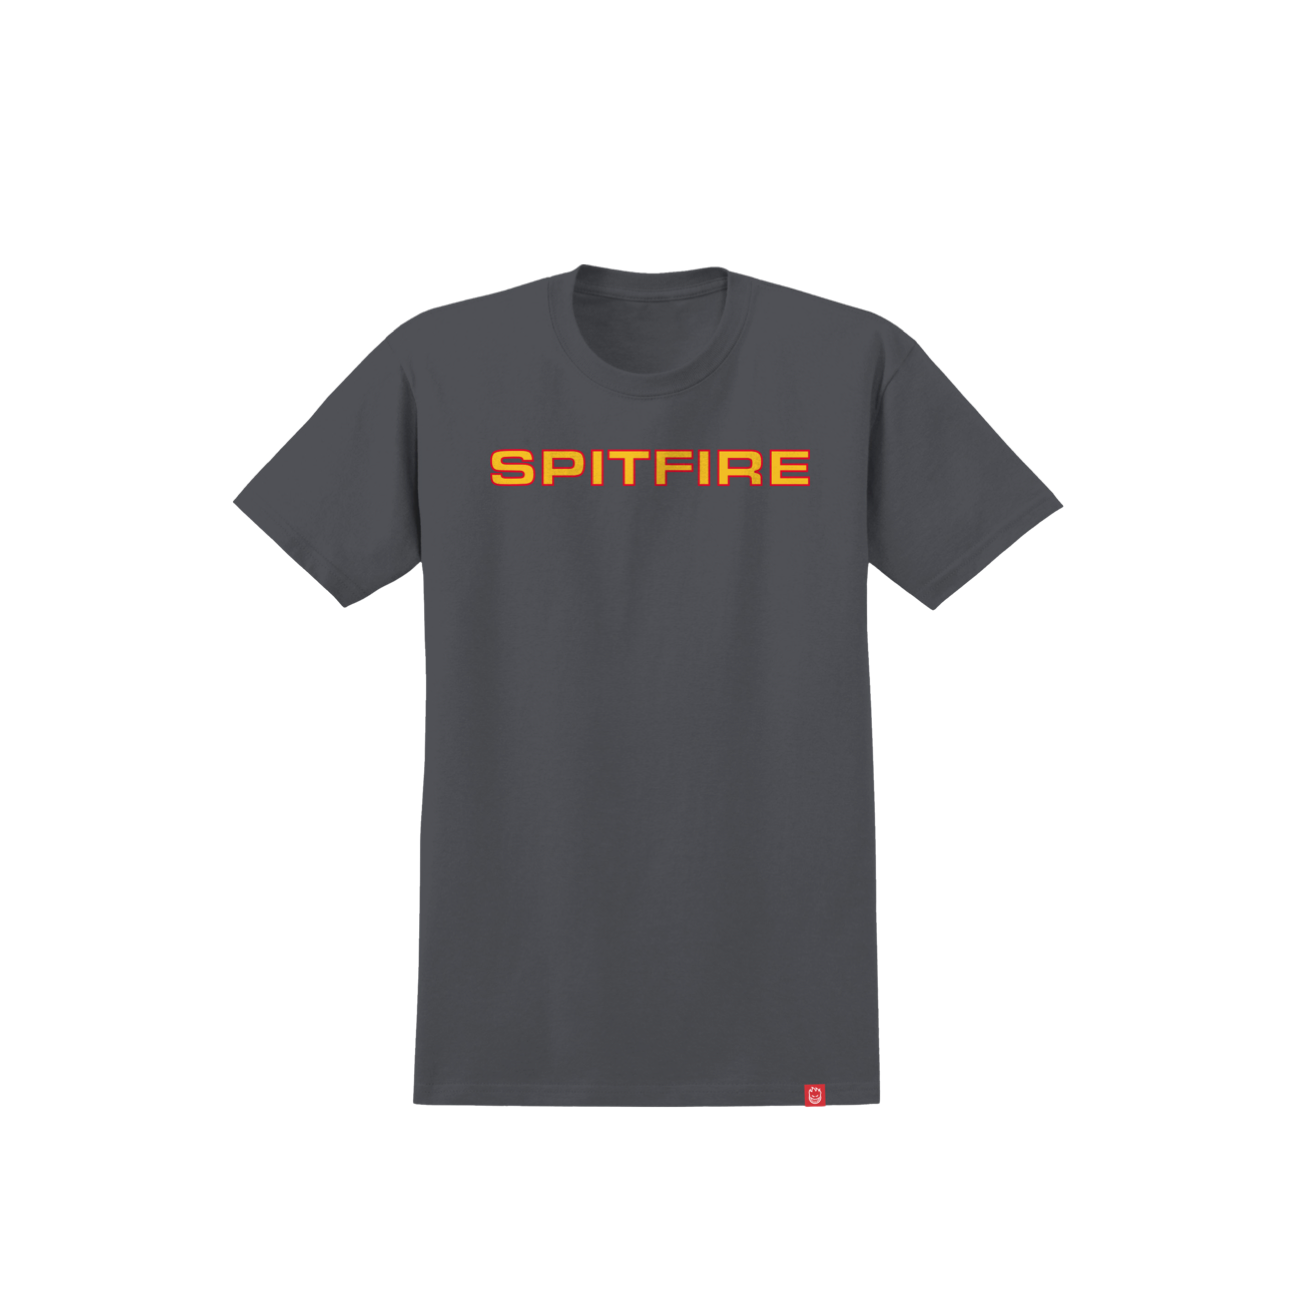 SPITFIRE - CLASSIC 87 TEE - CHARCOAL